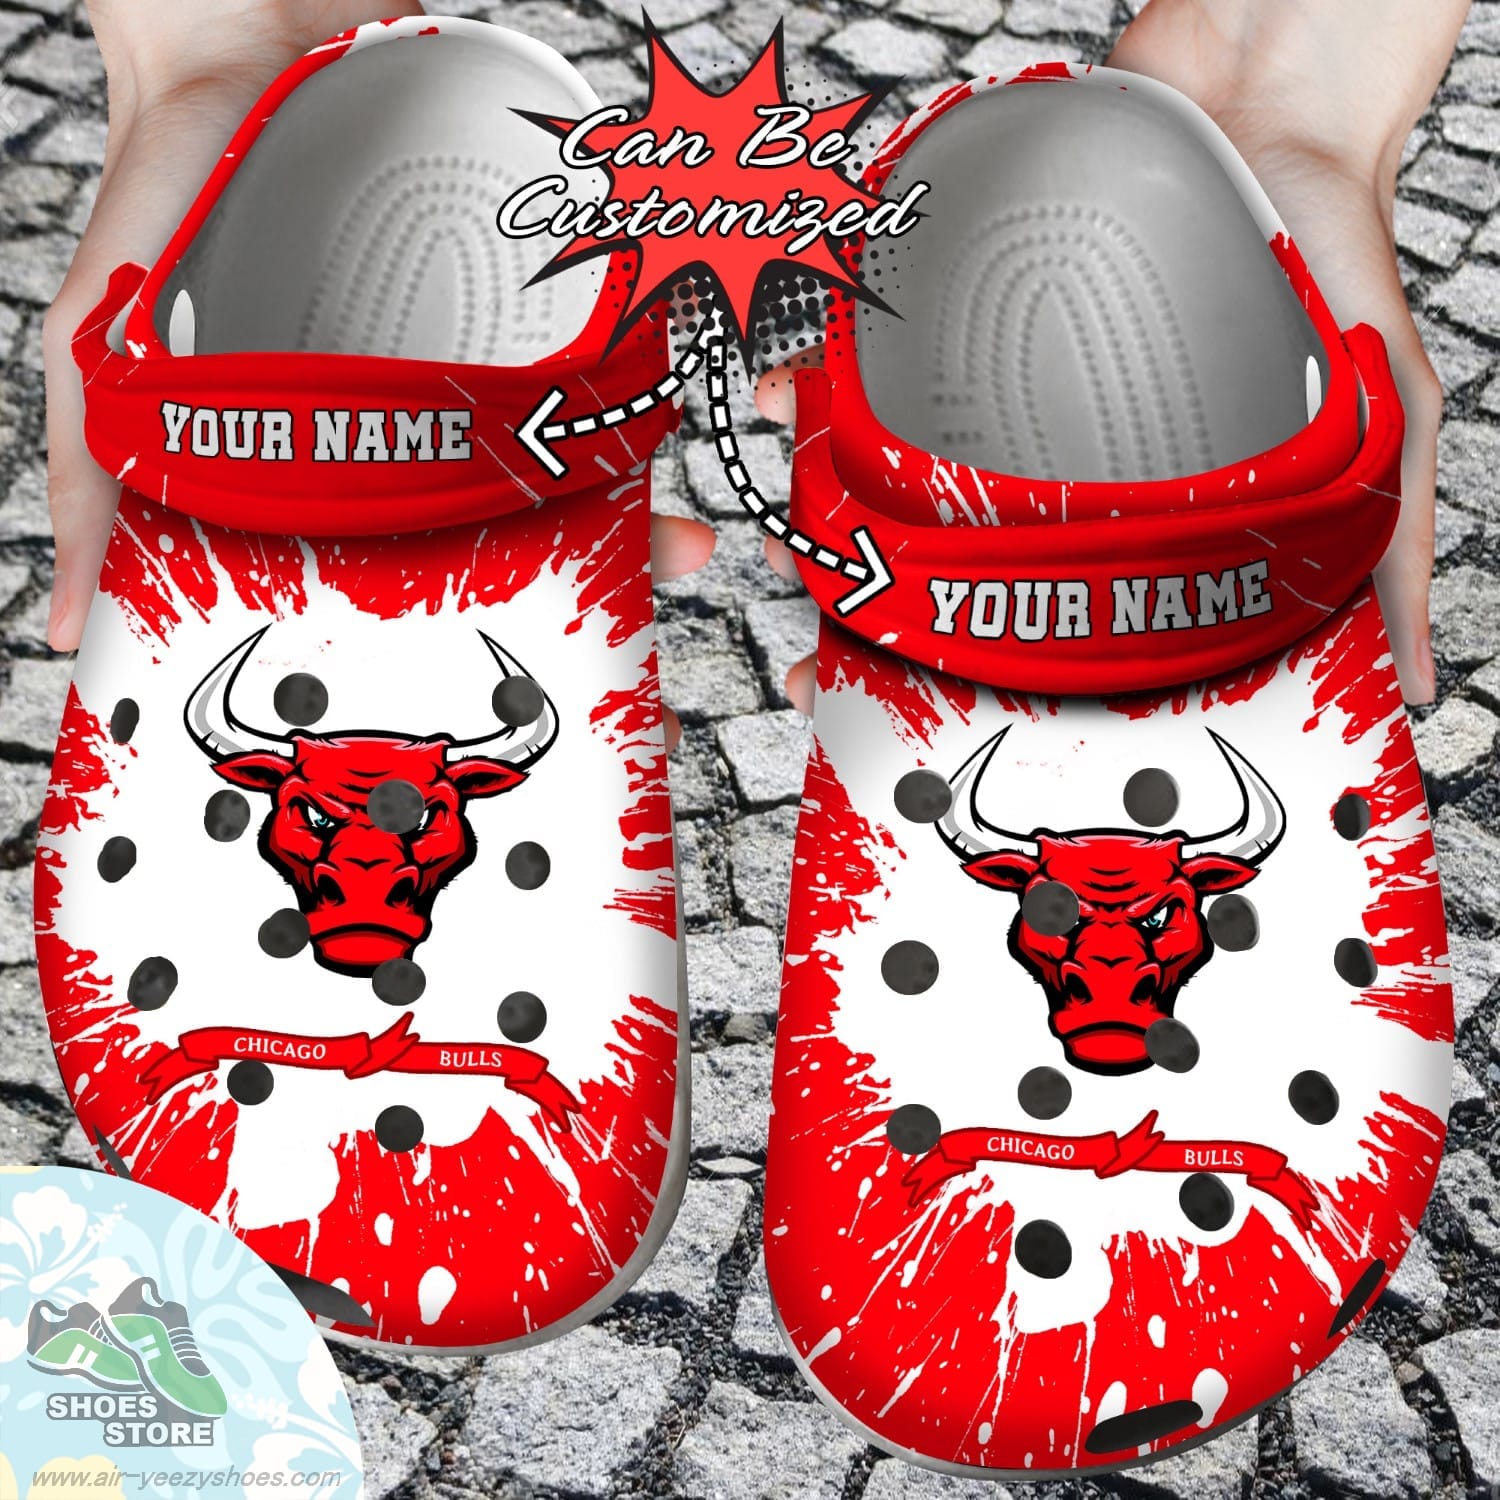 Personalized Chicago Bulls Team Clog Shoes Basketball Crocs Shoes